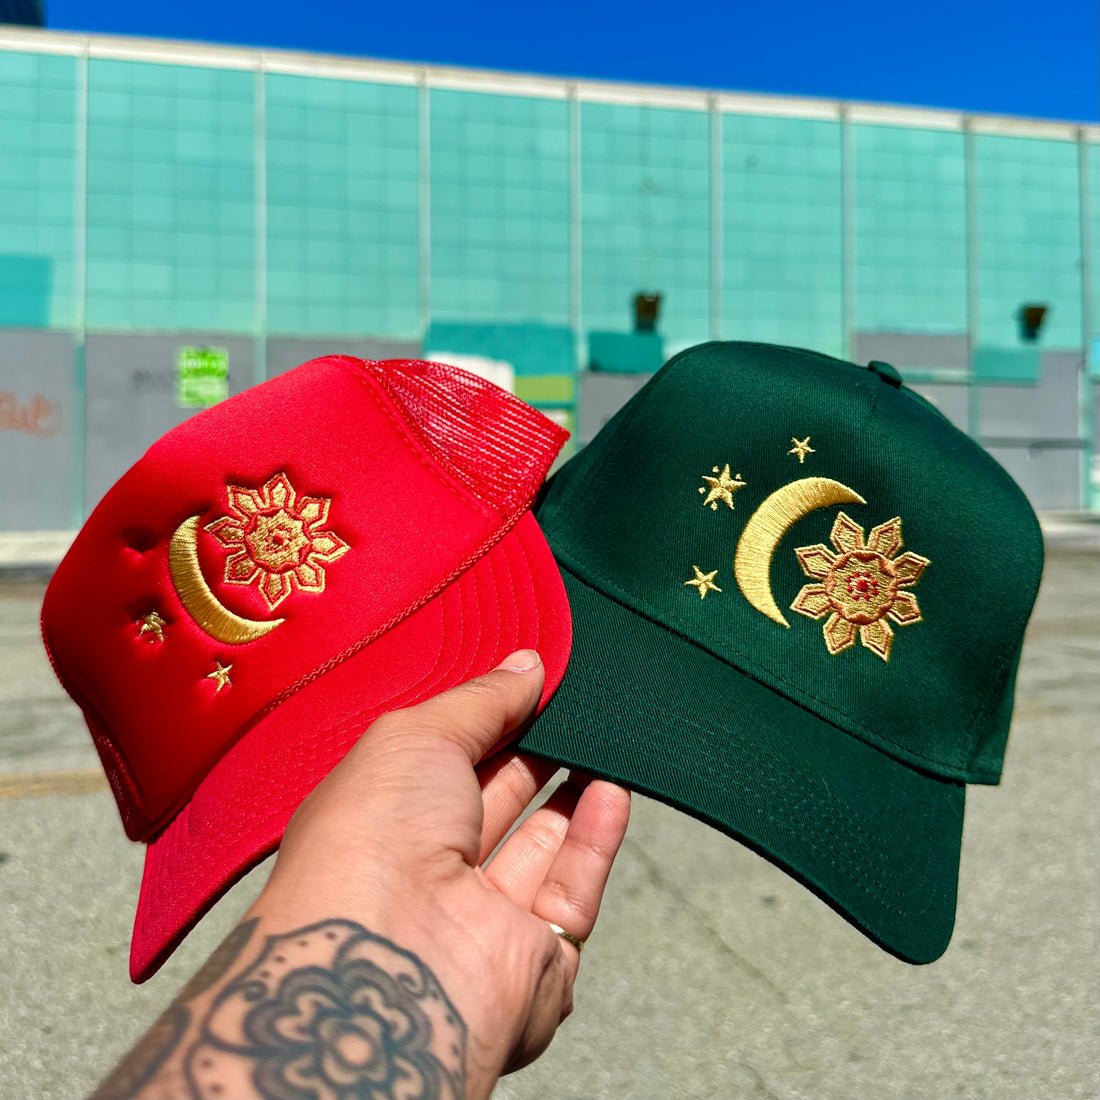 MALAY UNITY HATS ARE HERE!